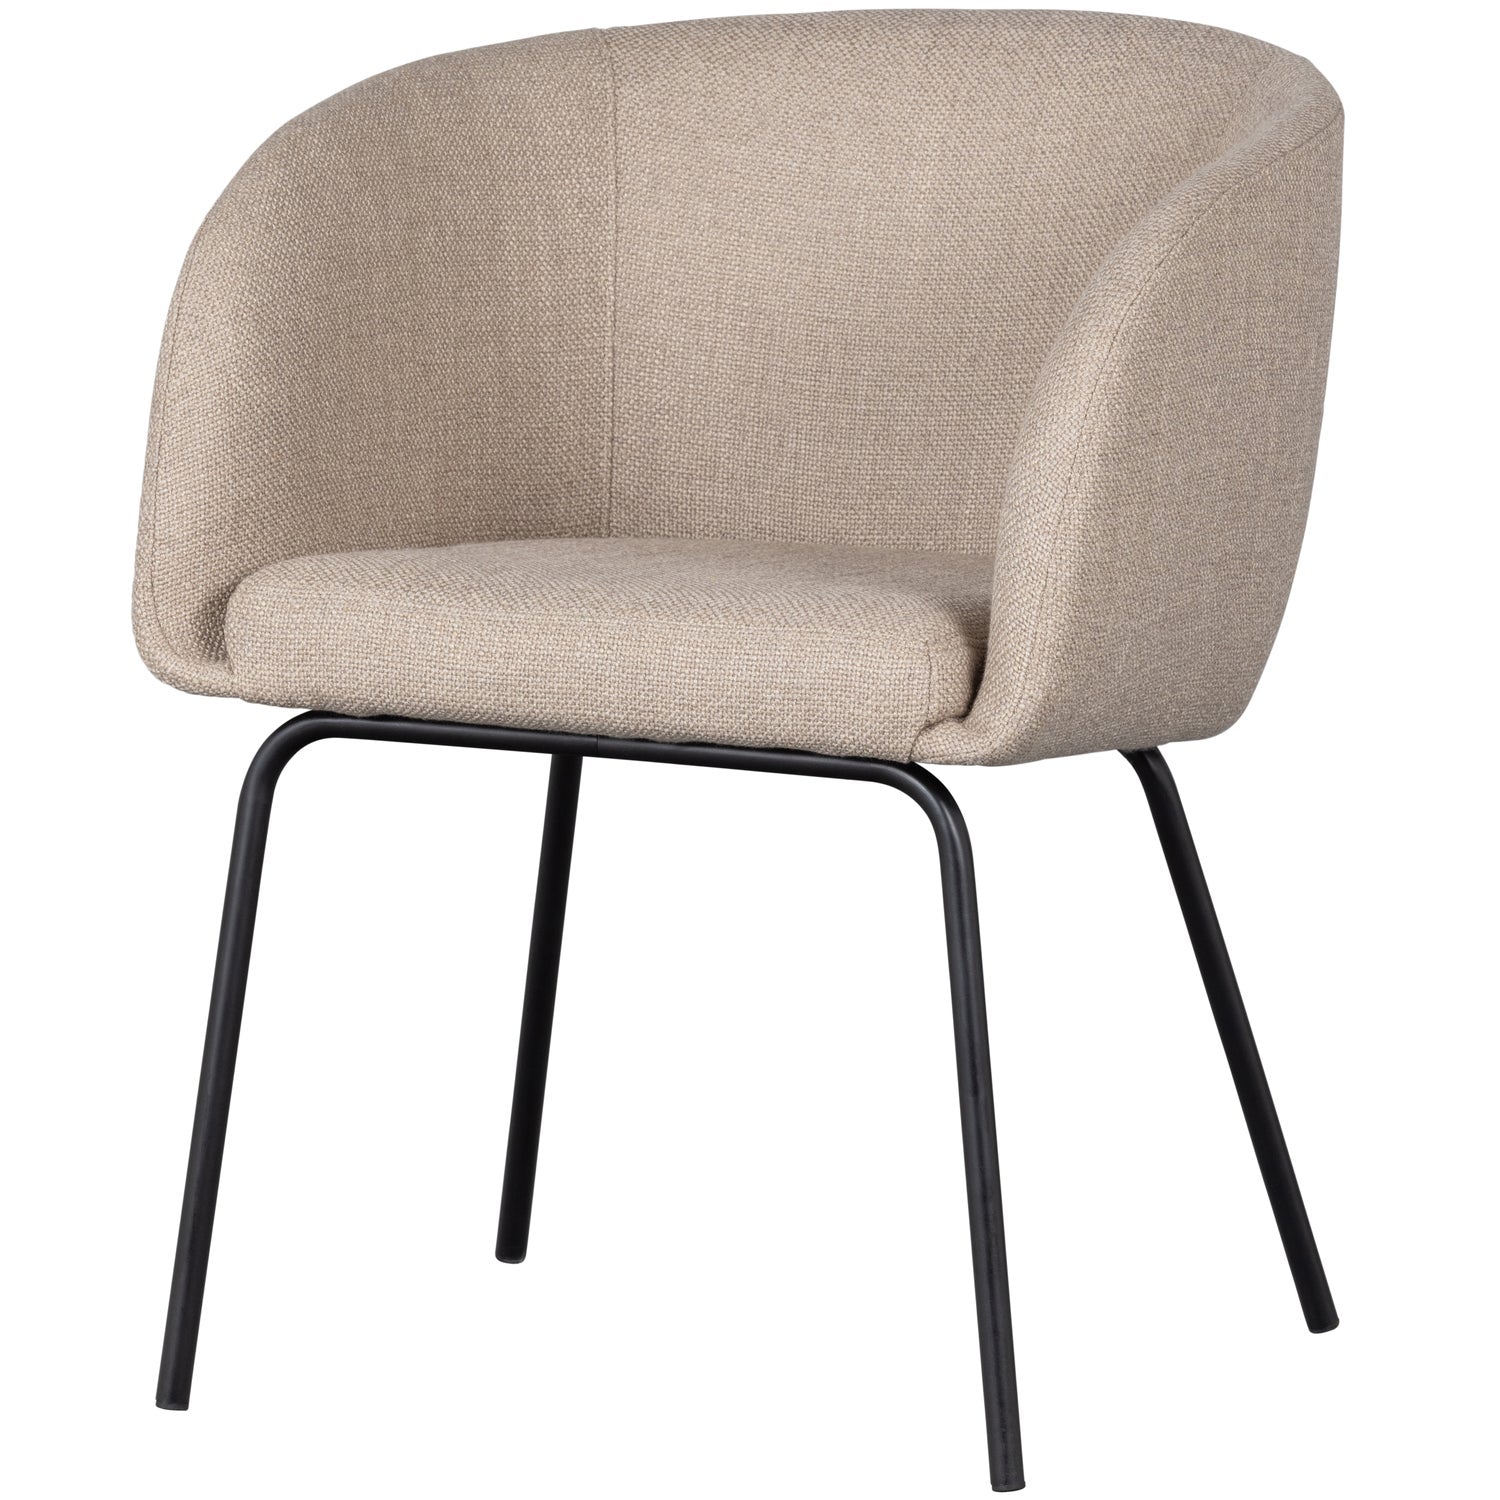 NOELLE DINING CHAIR WOVEN FABRIC SAND